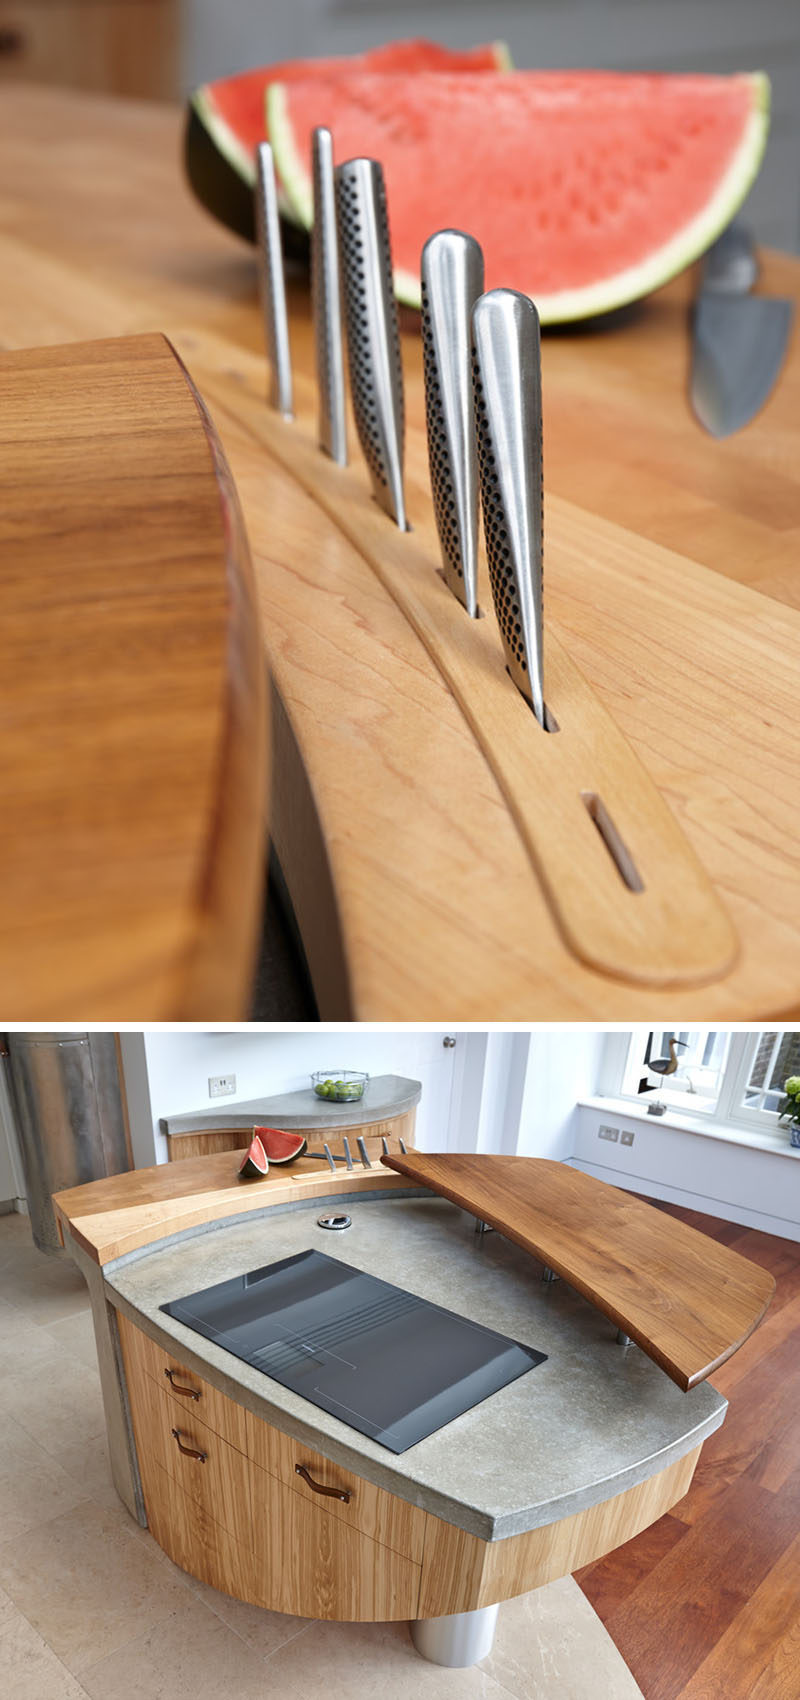 Interested in building my own under-cabinet knife block  what